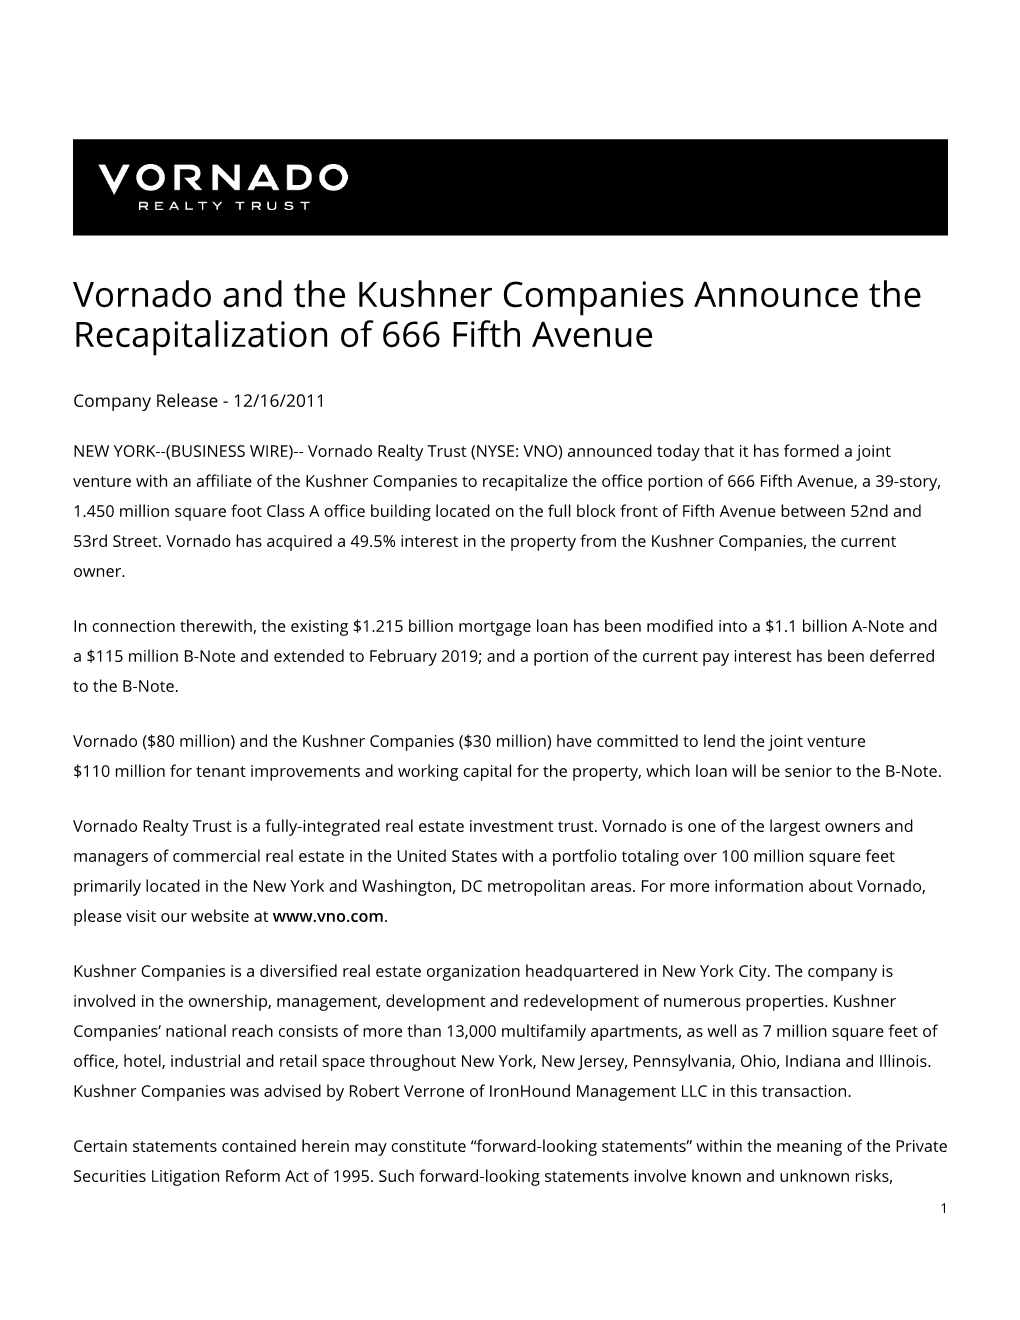 Vornado and the Kushner Companies Announce the Recapitalization of 666 Fifth Avenue